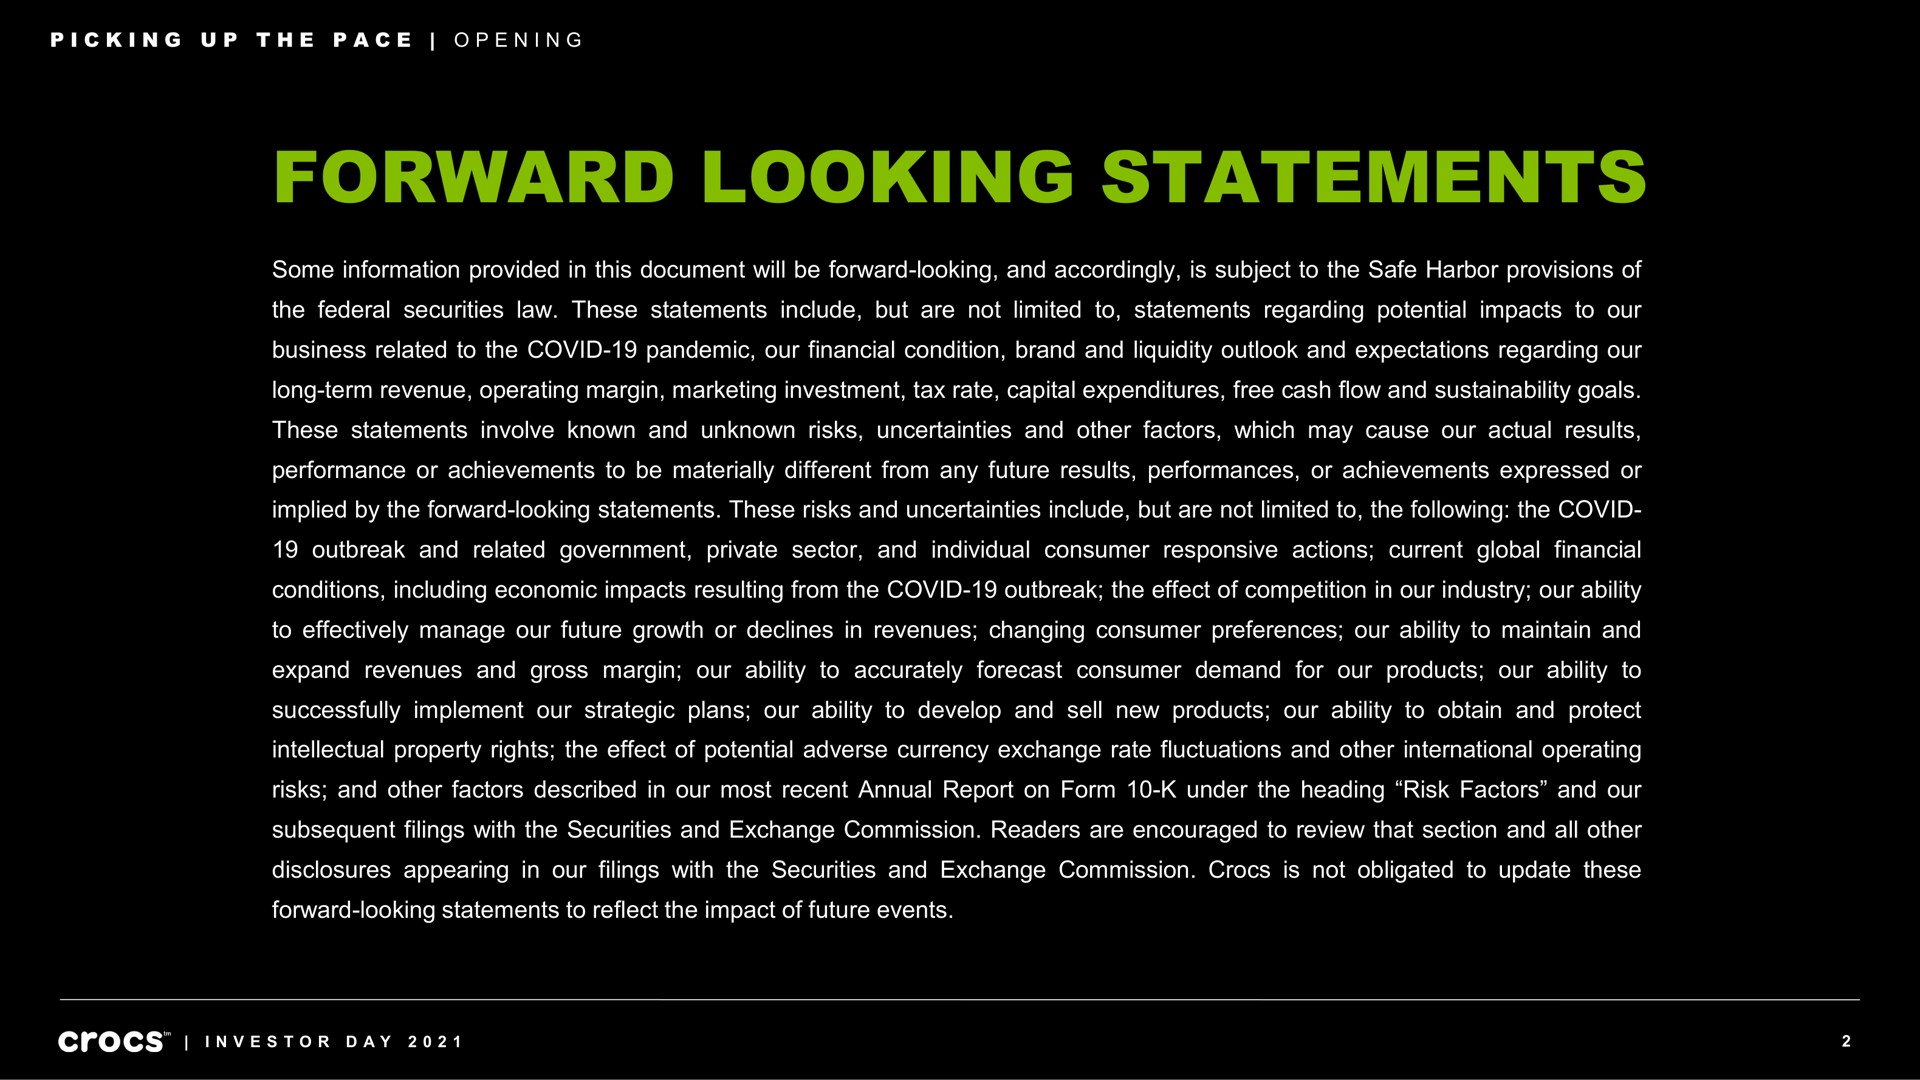 forward looking statements some information provided in this document will be forward looking and accordingly is subject to the safe harbor provisions of the federal securities law these statements include but are not limited to statements regarding potential impacts to our business related to the covid pandemic our financial condition brand and liquidity outlook and expectations regarding our long term revenue operating margin marketing investment tax rate capital expenditures free cash flow and goals these statements involve known and unknown risks uncertainties and other factors which may cause our actual results performance or achievements to be materially different from any future results performances or achievements expressed or implied by the forward looking statements these risks and uncertainties include but are not limited to the following the covid outbreak and related government private sector and individual consumer responsive actions current global financial conditions including economic impacts resulting from the covid outbreak the effect of competition in our industry our ability to effectively manage our future growth or declines in revenues changing consumer preferences our ability to maintain and expand revenues and gross margin our ability to accurately forecast consumer demand for our products our ability to successfully implement our strategic plans our ability to develop and sell new products our ability to obtain and protect intellectual property rights the effect of potential adverse currency exchange rate fluctuations and other international operating risks and other factors described in our most recent annual report on form under the heading risk factors and our subsequent filings with the securities and exchange commission readers are encouraged to review that section and all other disclosures appearing in our filings with the securities and exchange commission is not obligated to update these forward looking statements to reflect the impact of future events picking up pace opening investor day | Crocs